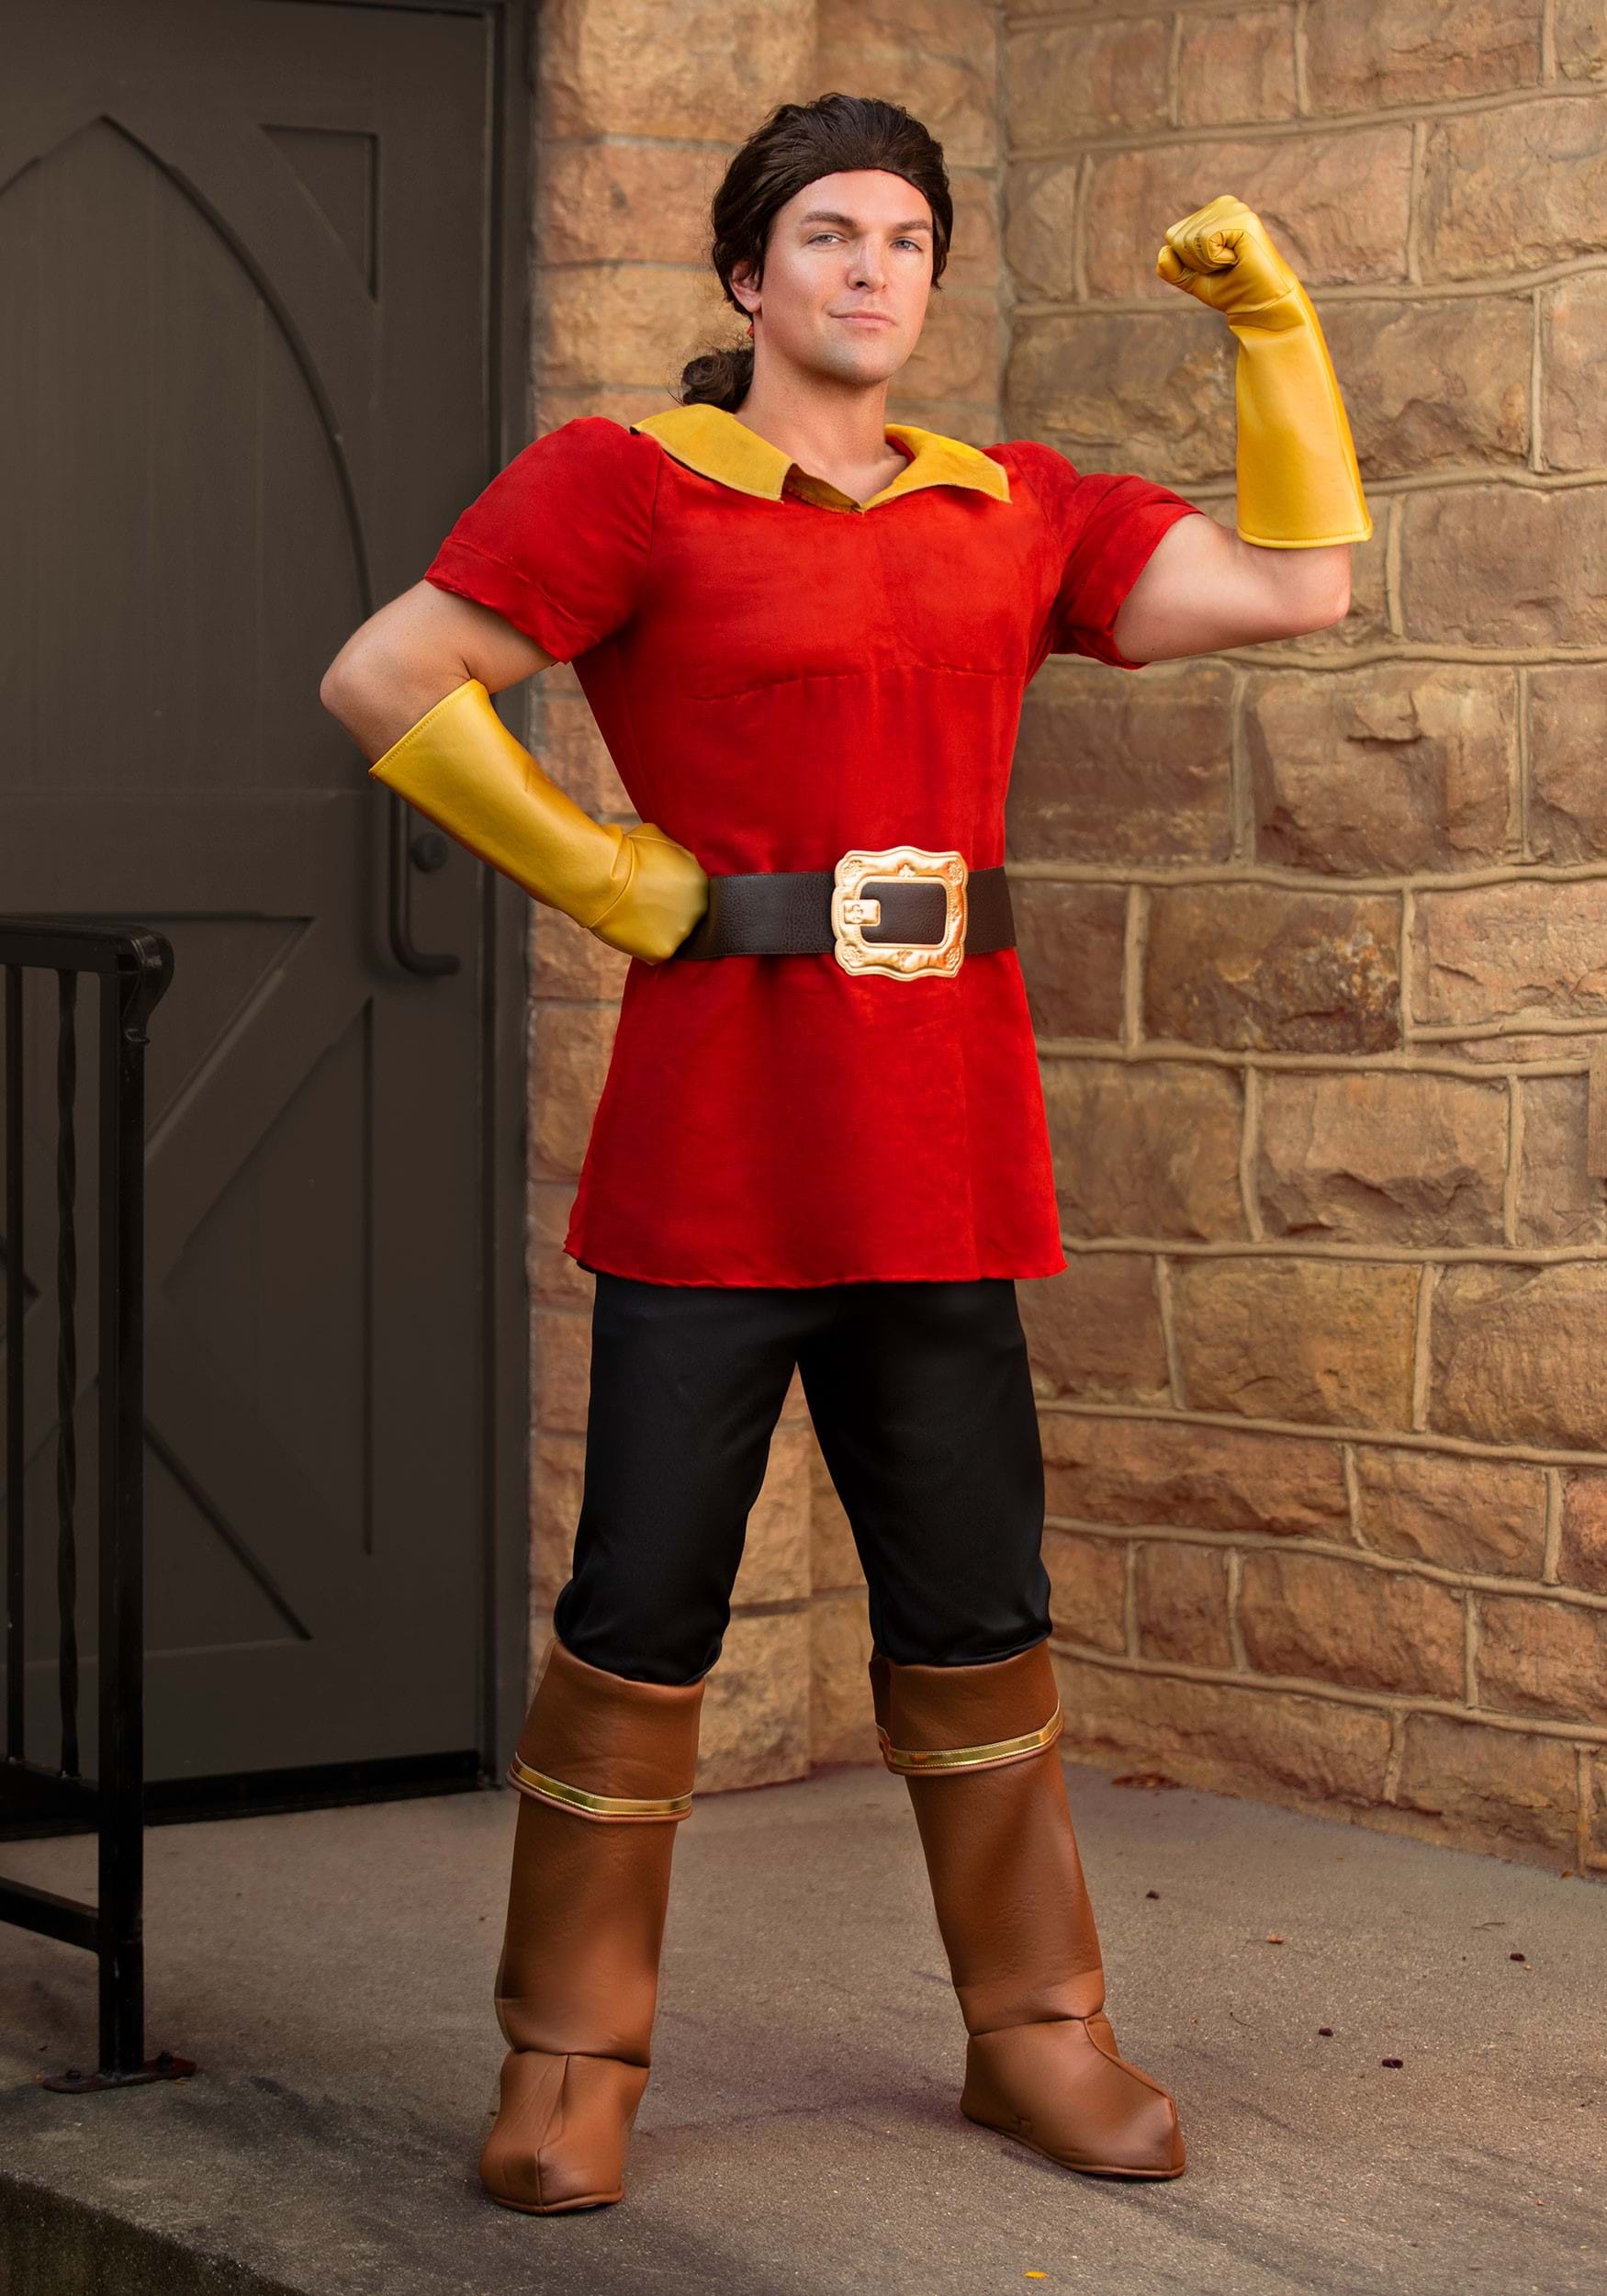 gaston beauty and the beast costume.